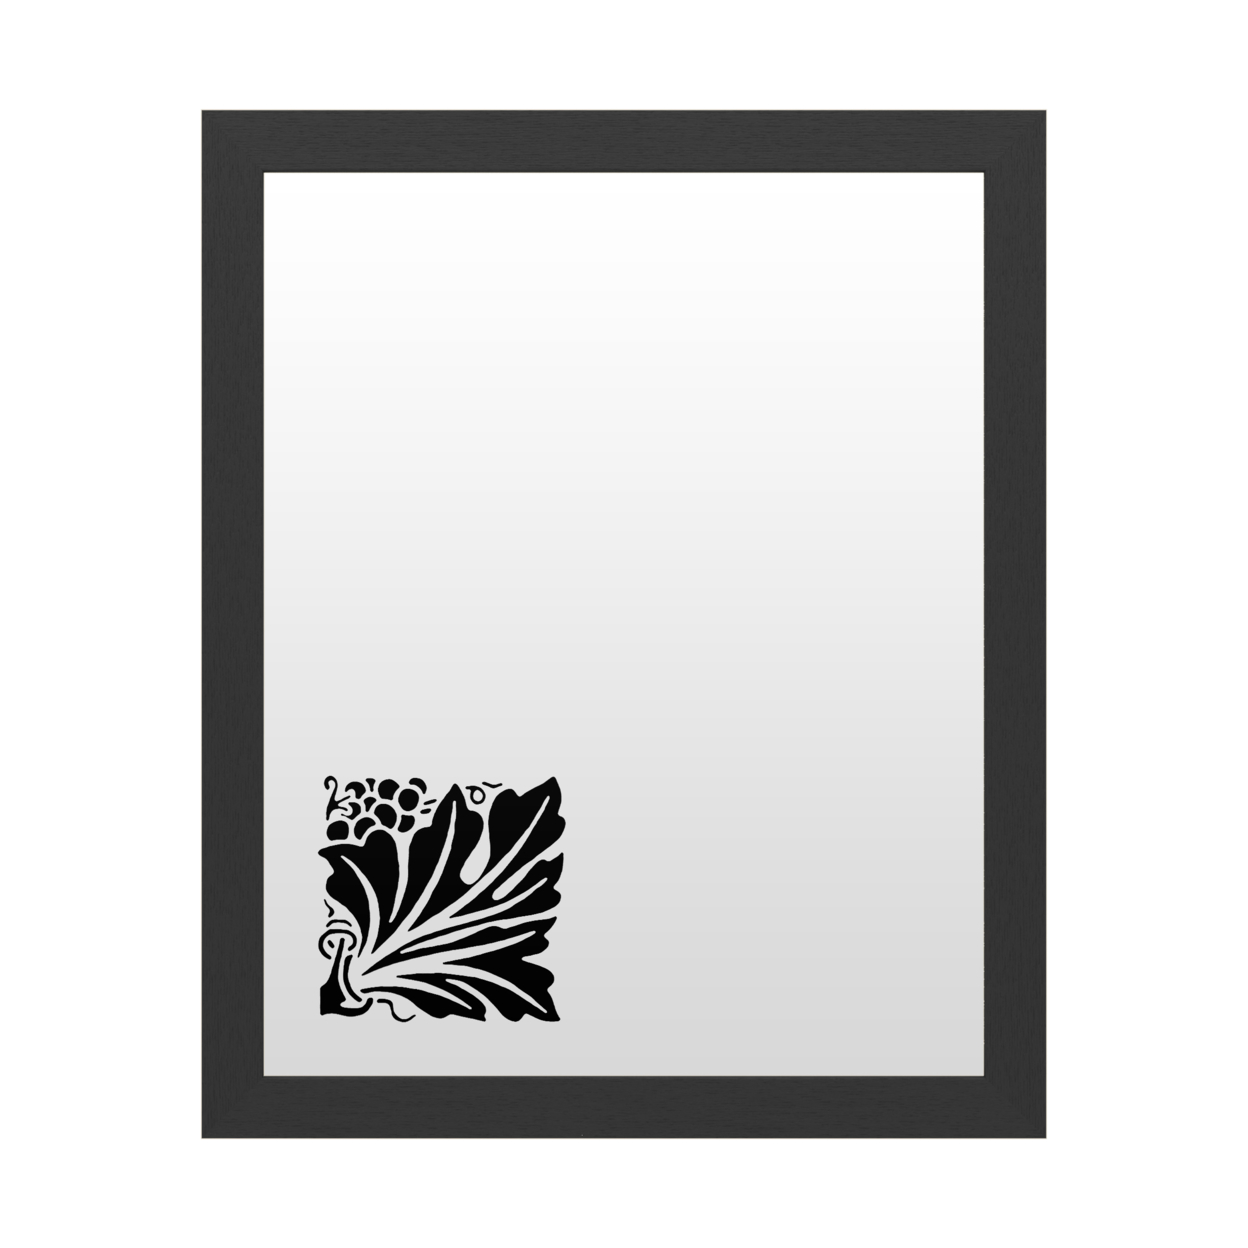 Dry Erase 16 X 20 Marker Board With Printed Artwork - Vision Studio Graphic Beauty Iv White Board - Ready To Hang